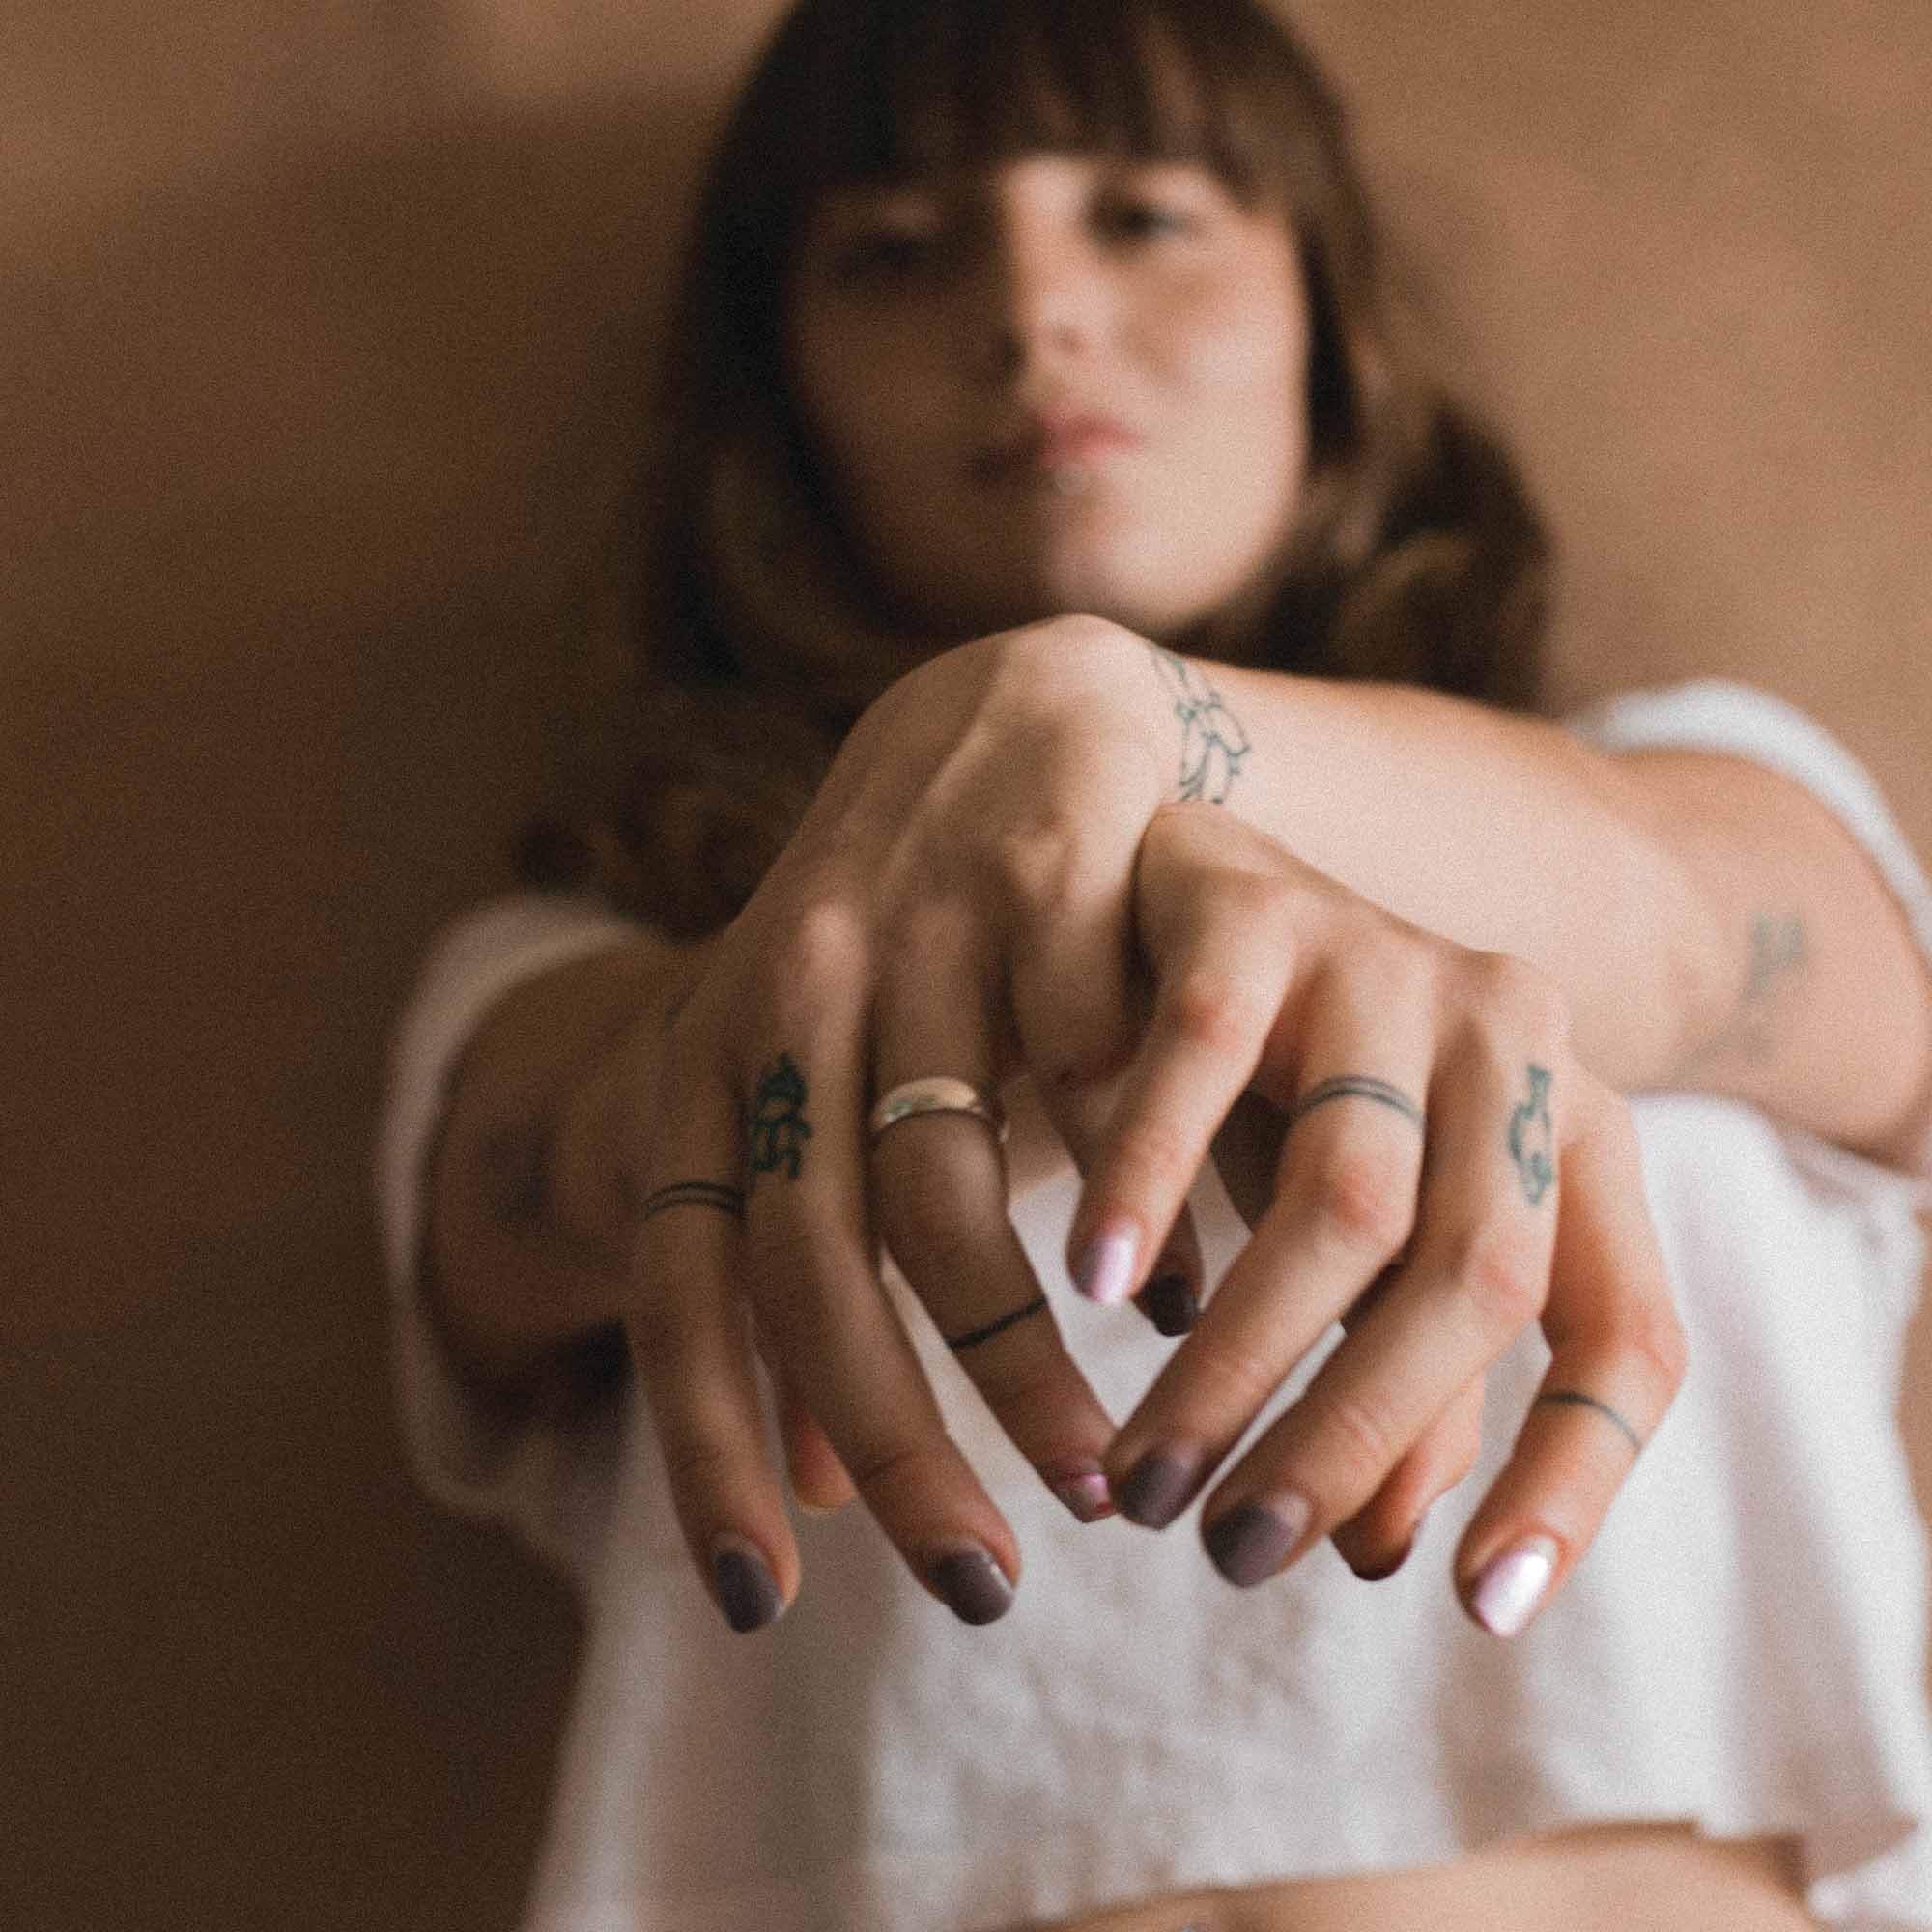 A women with her crossed over hands in front of her with tattoos on her hands and fingers.  